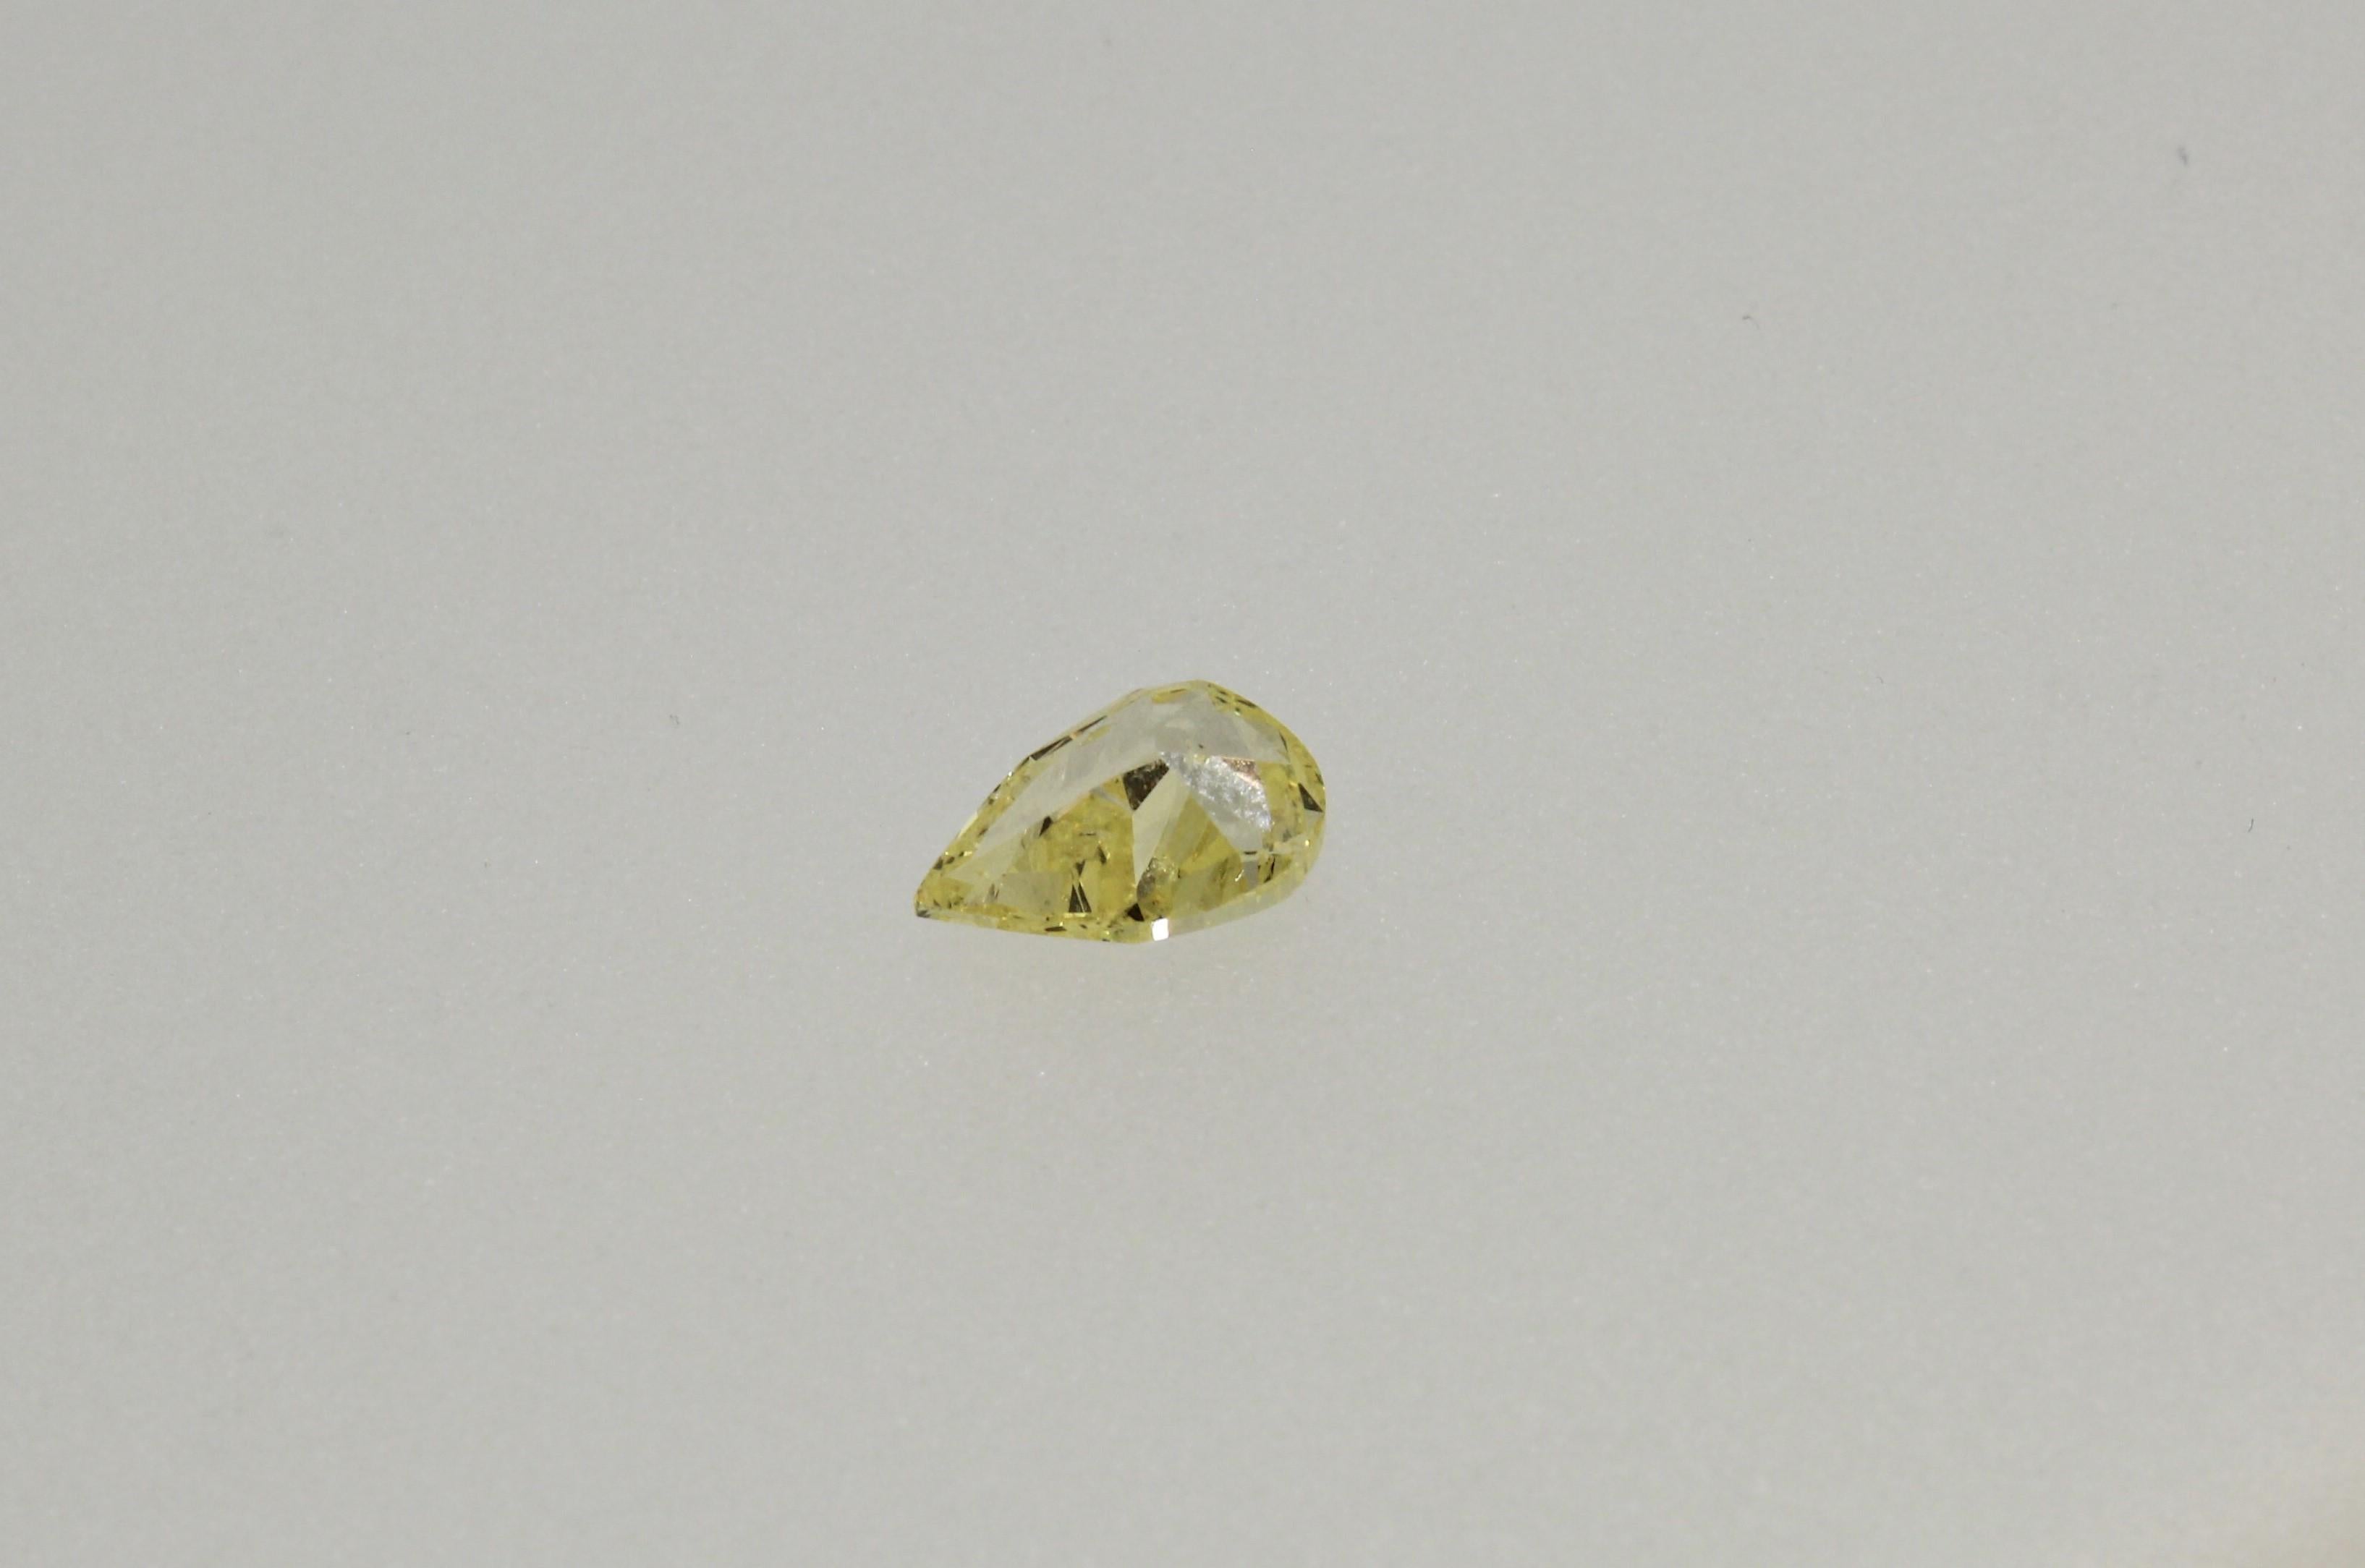 Stunning 1.01 ct Natural Fancy Intense Yellow Pear Shape Diamond with a GIA lab report numbered, 5151504831.  This is a perfect diamond for a pendant or a ring!  It has amazing brilliance and fire and will be a headlight wherever it is set!  Clarity